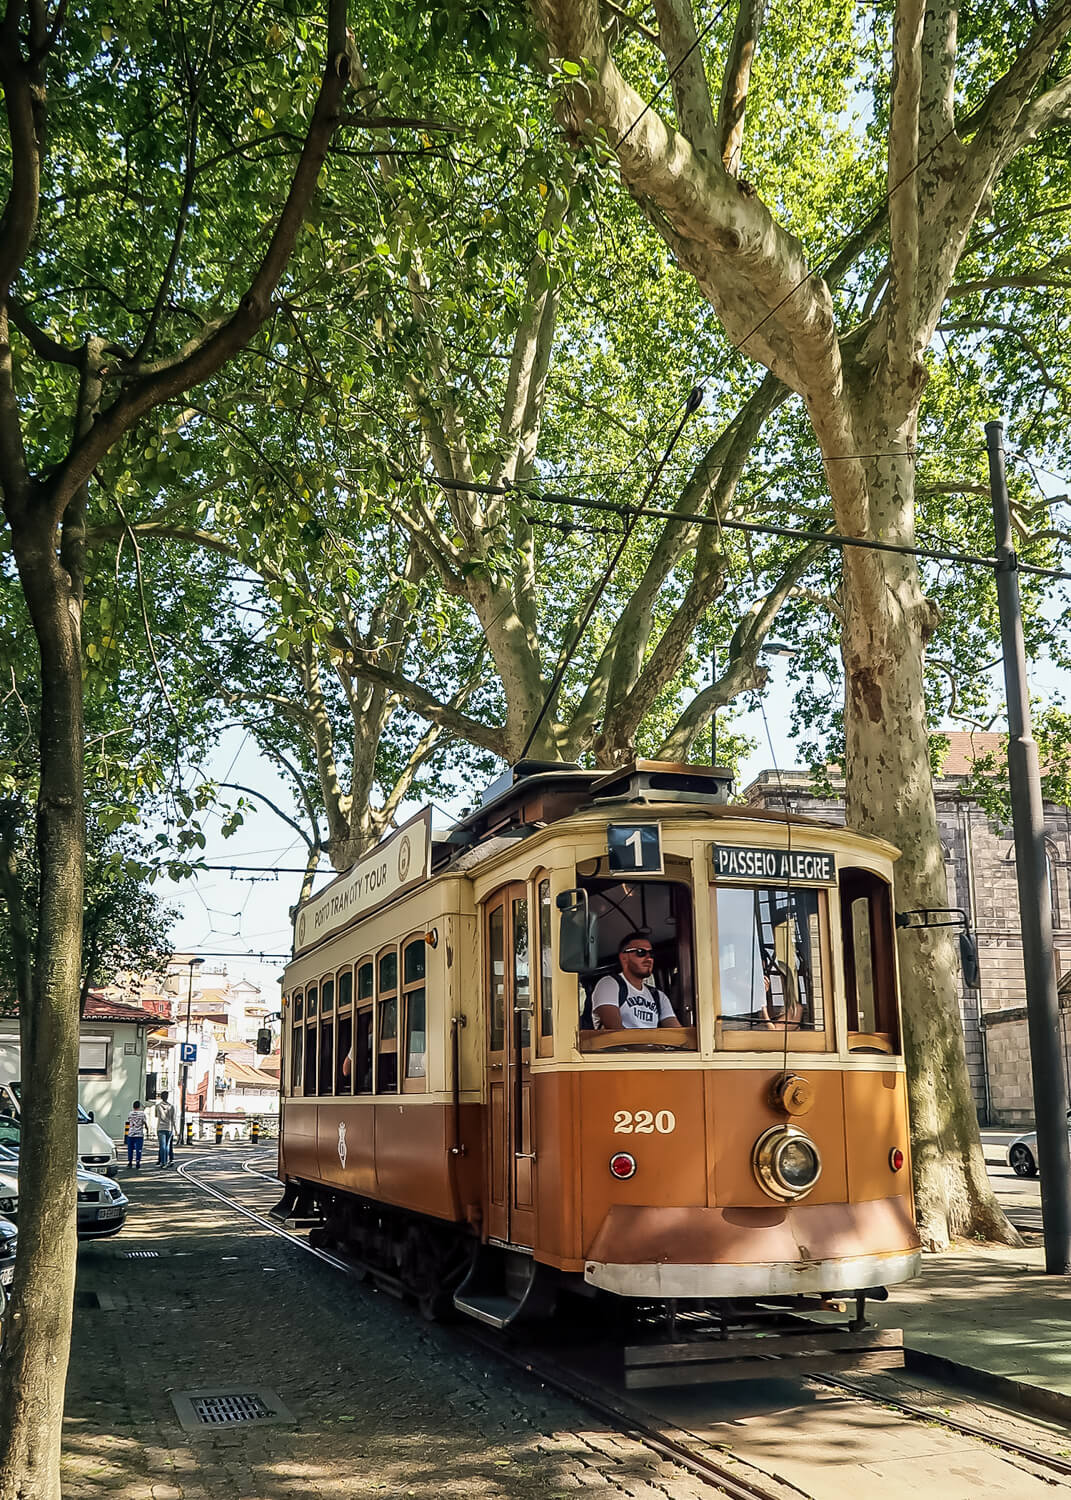 Old tram coming through avenue of trees